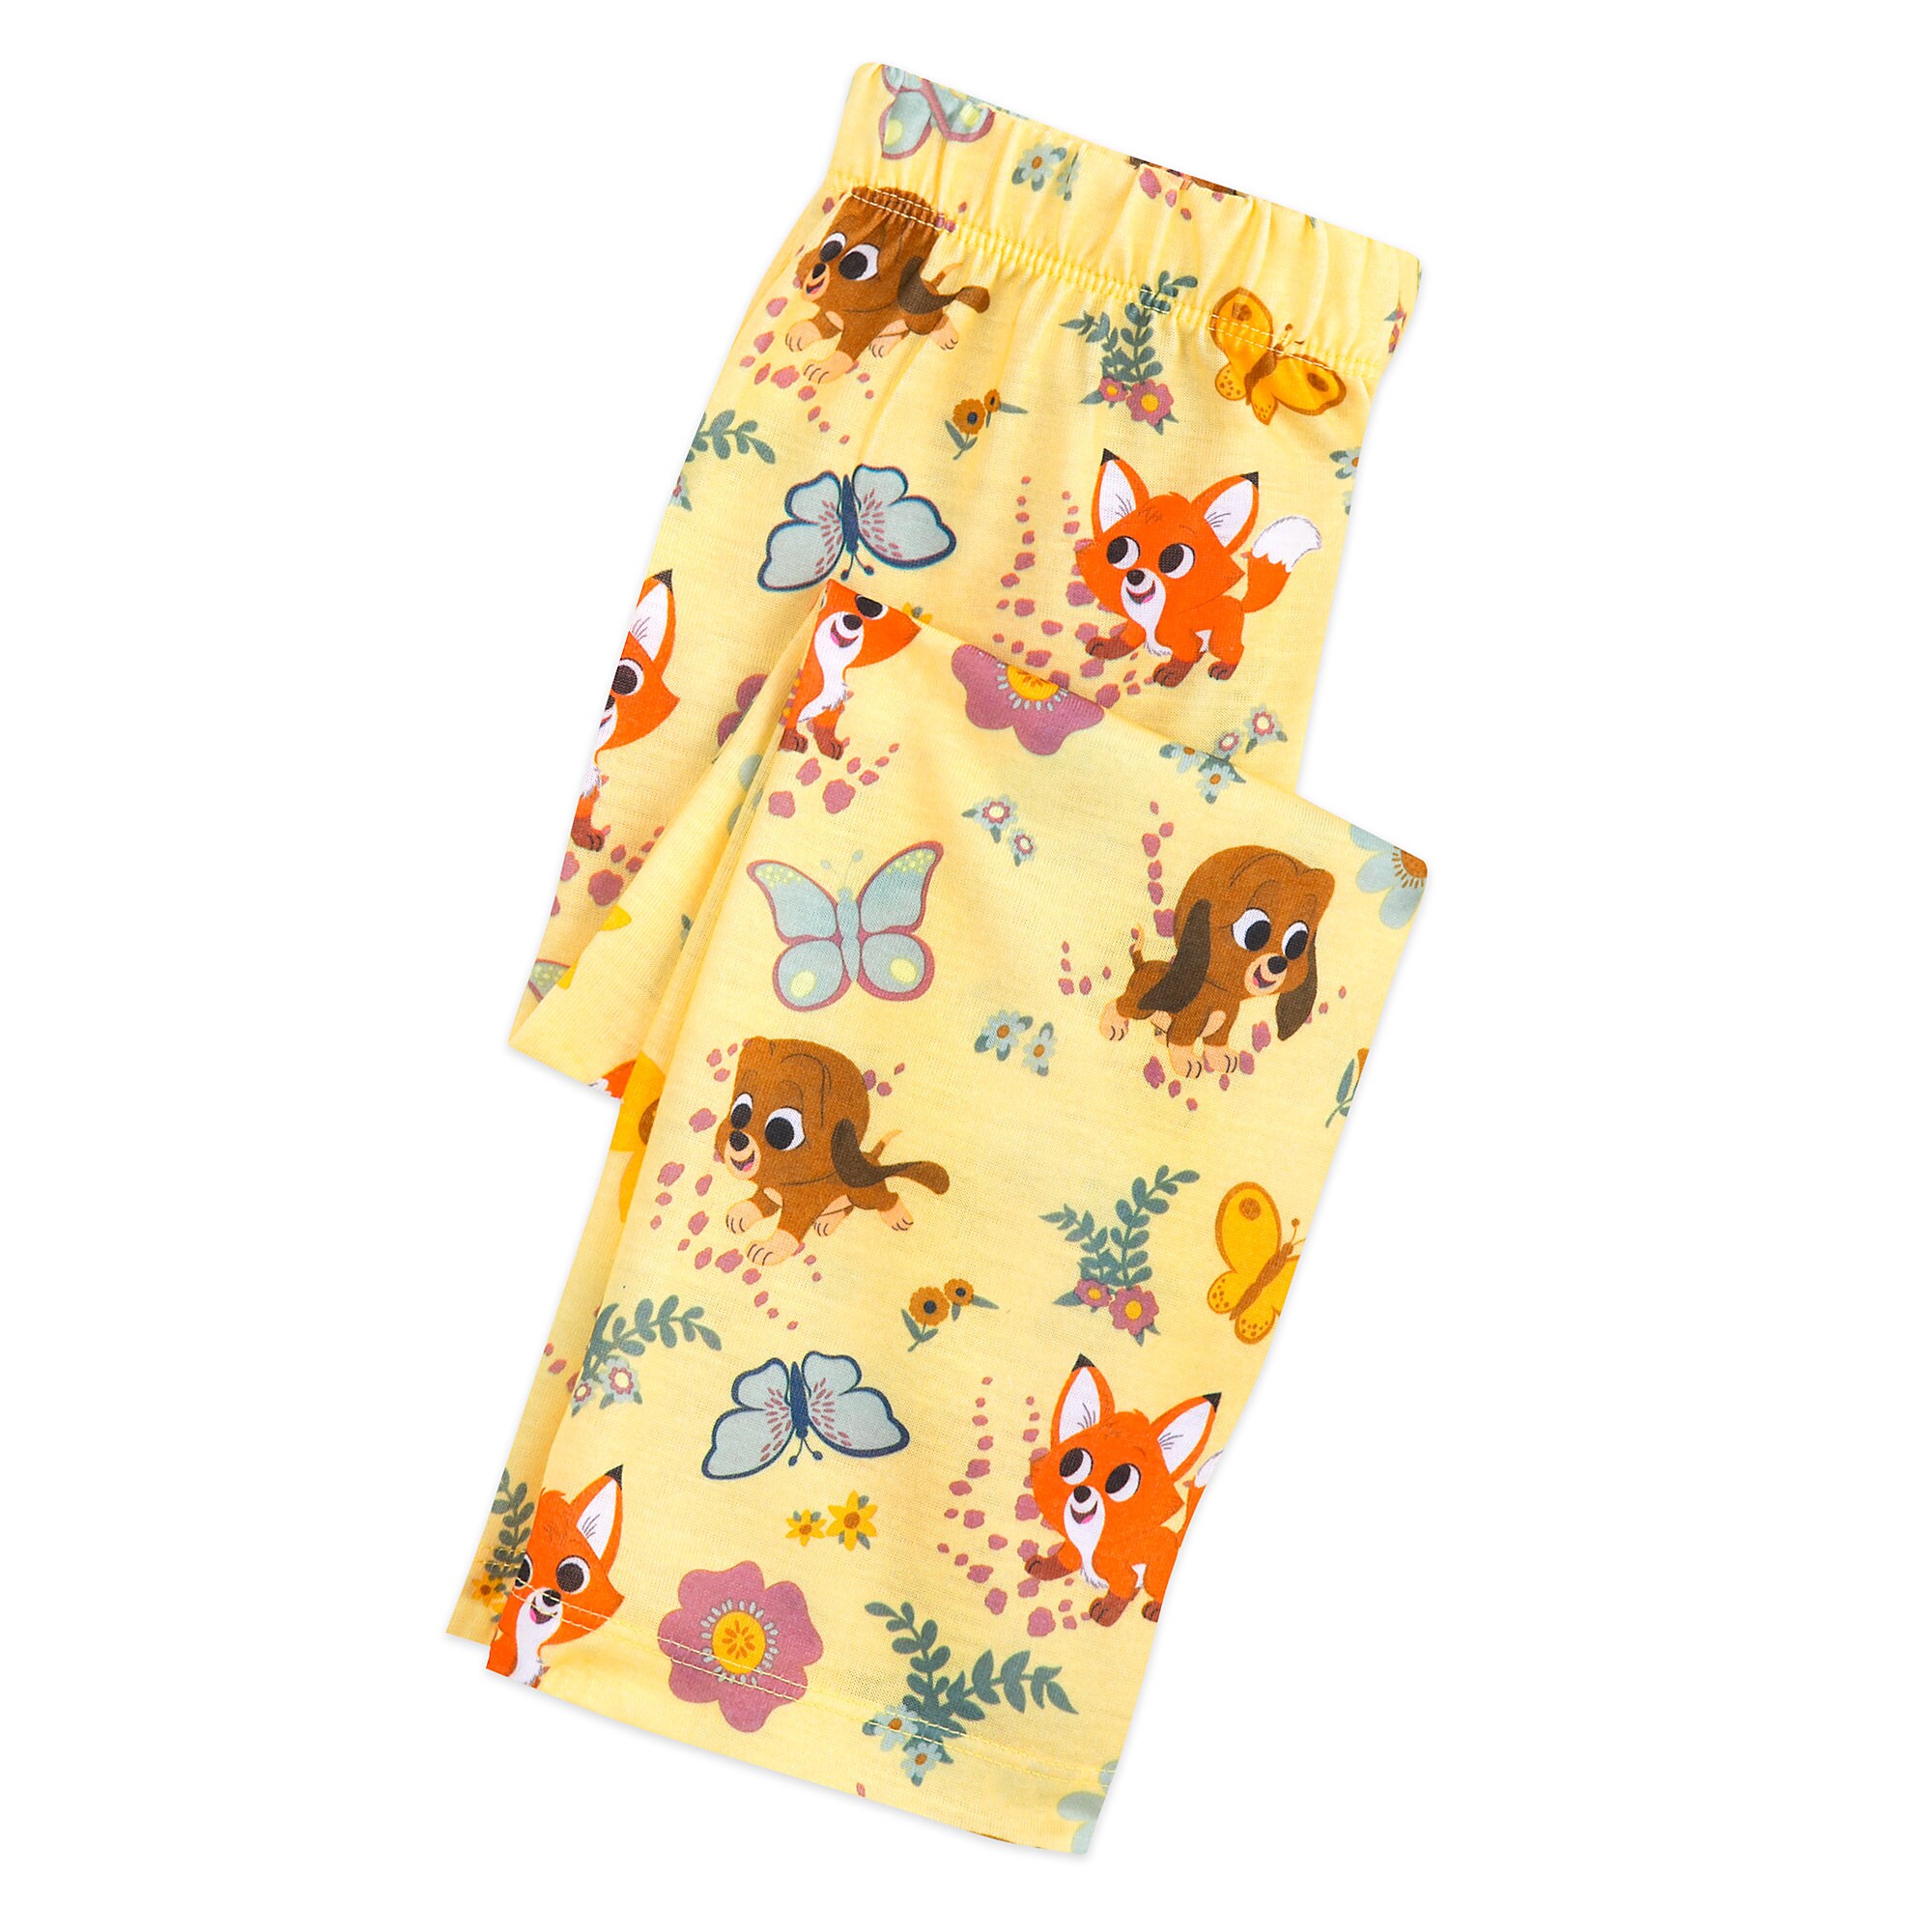 The Fox and the Hound Sleep Set for Girls - Disney Furrytale friends